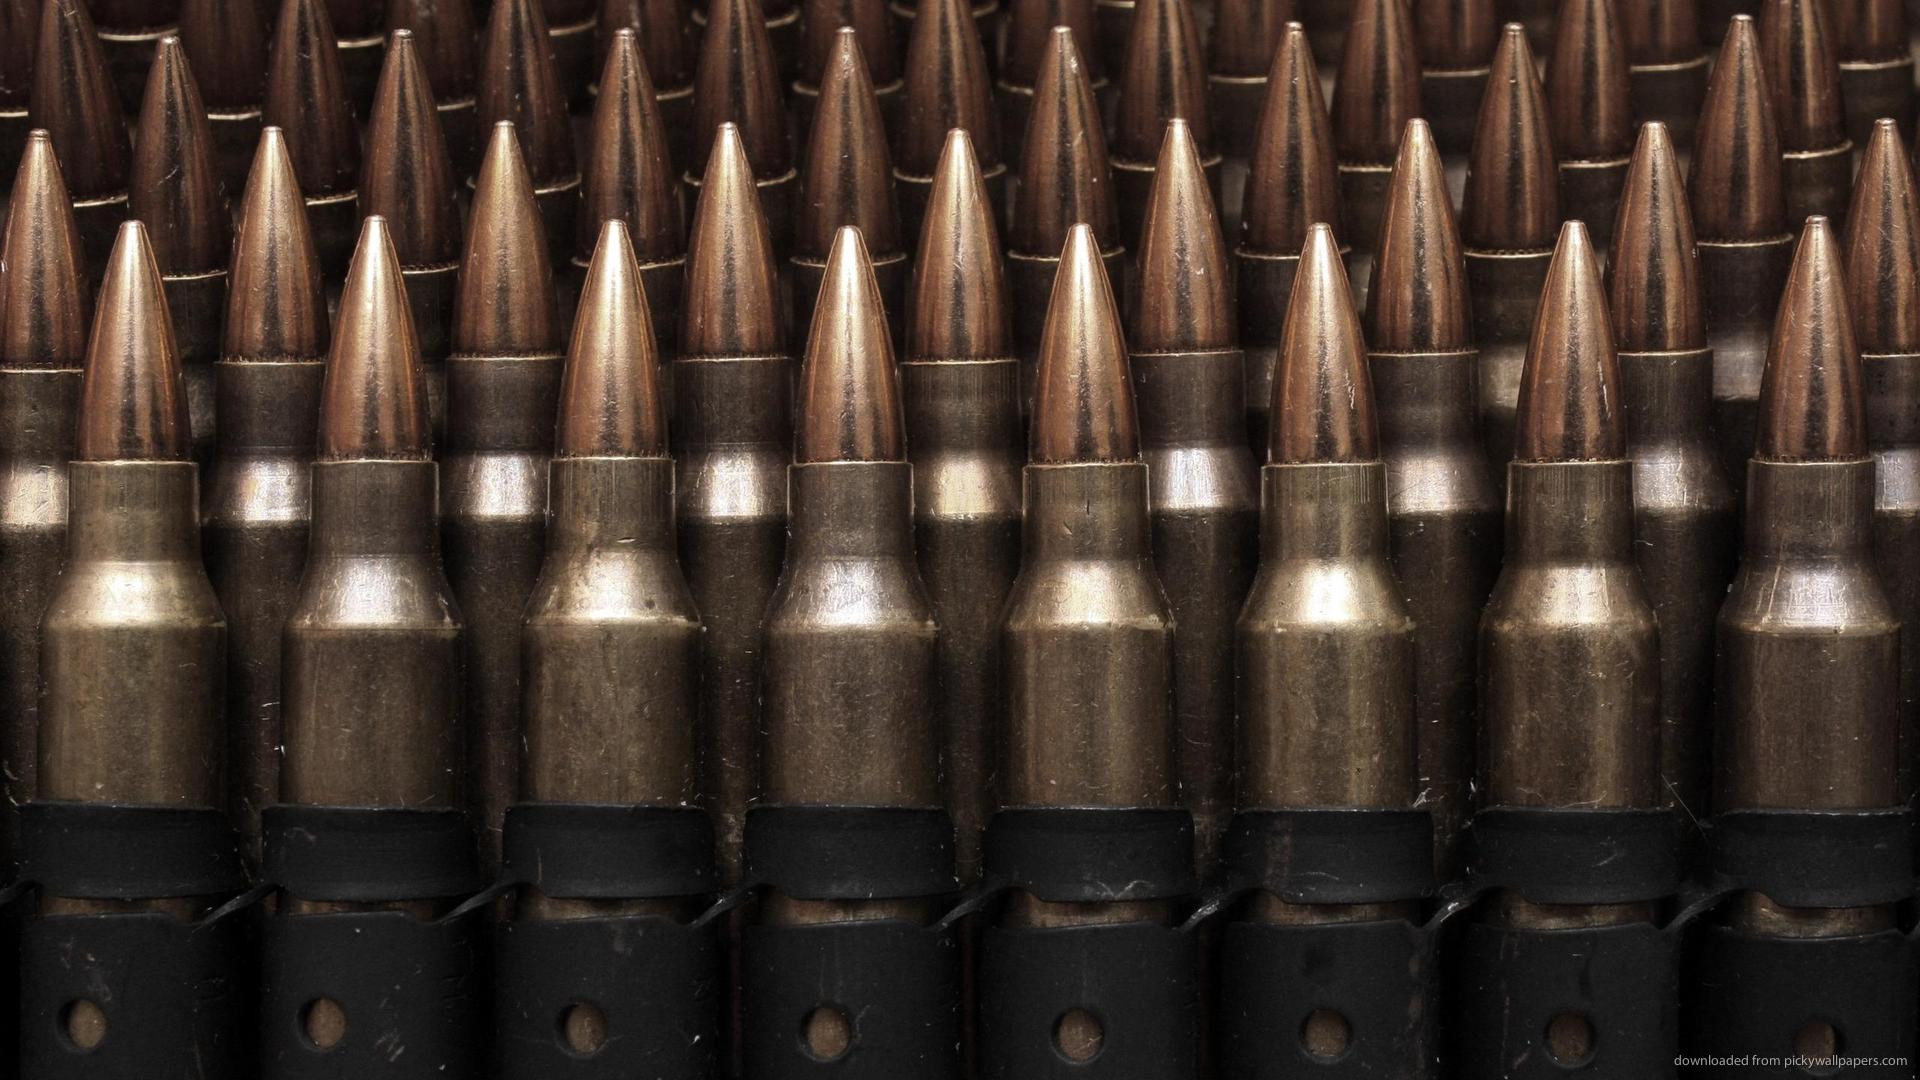 Hd Wallpapers Of Guns And Bullets 38+ - dzbc.org